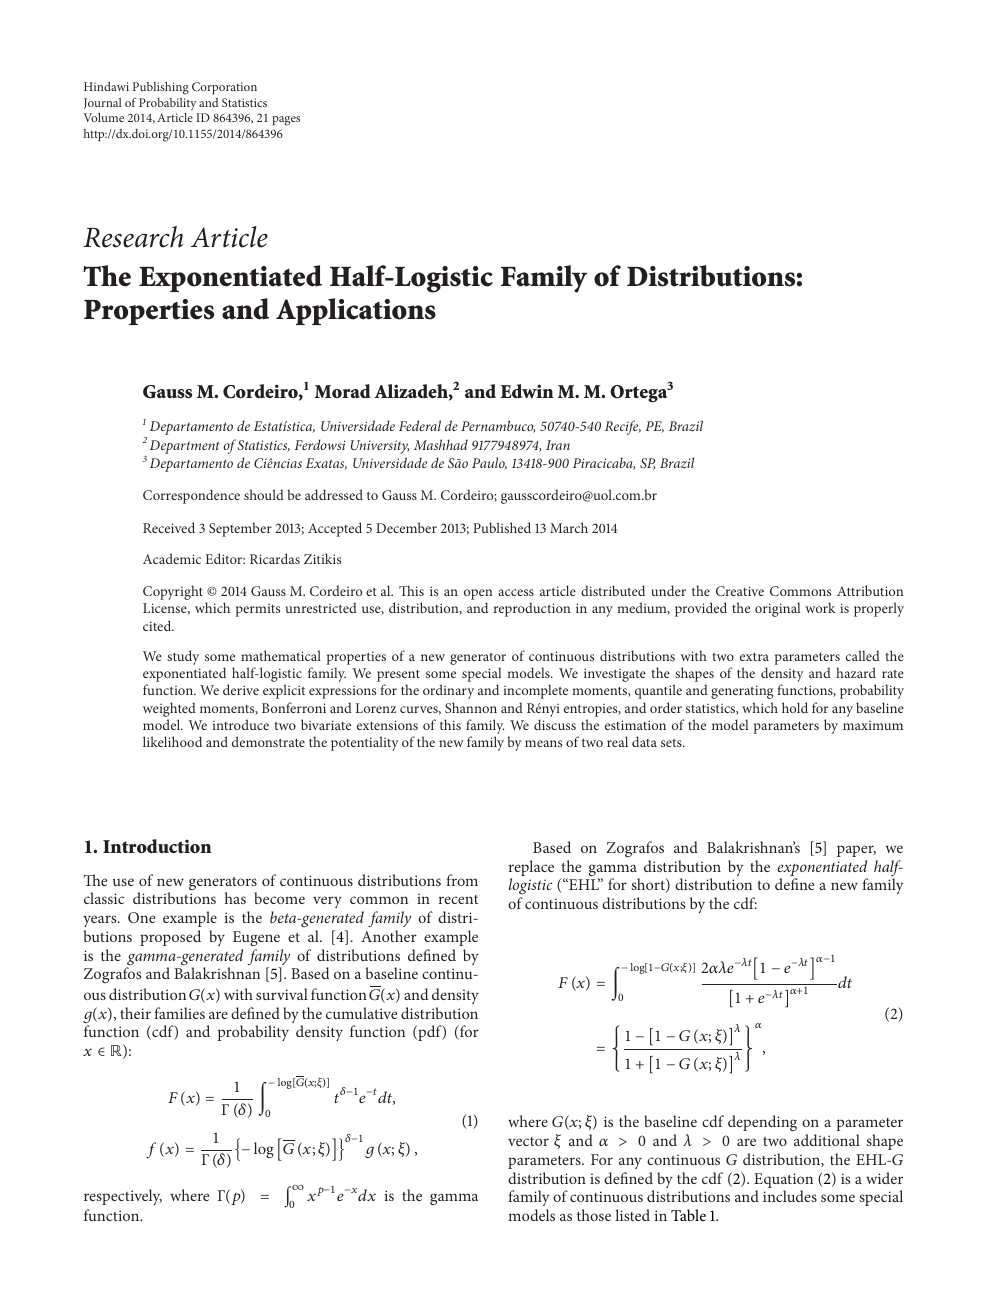 The Exponentiated Half Logistic Family Of Distributions Properties And Applications Topic Of Research Paper In Mathematics Download Scholarly Article Pdf And Read For Free On Cyberleninka Open Science Hub